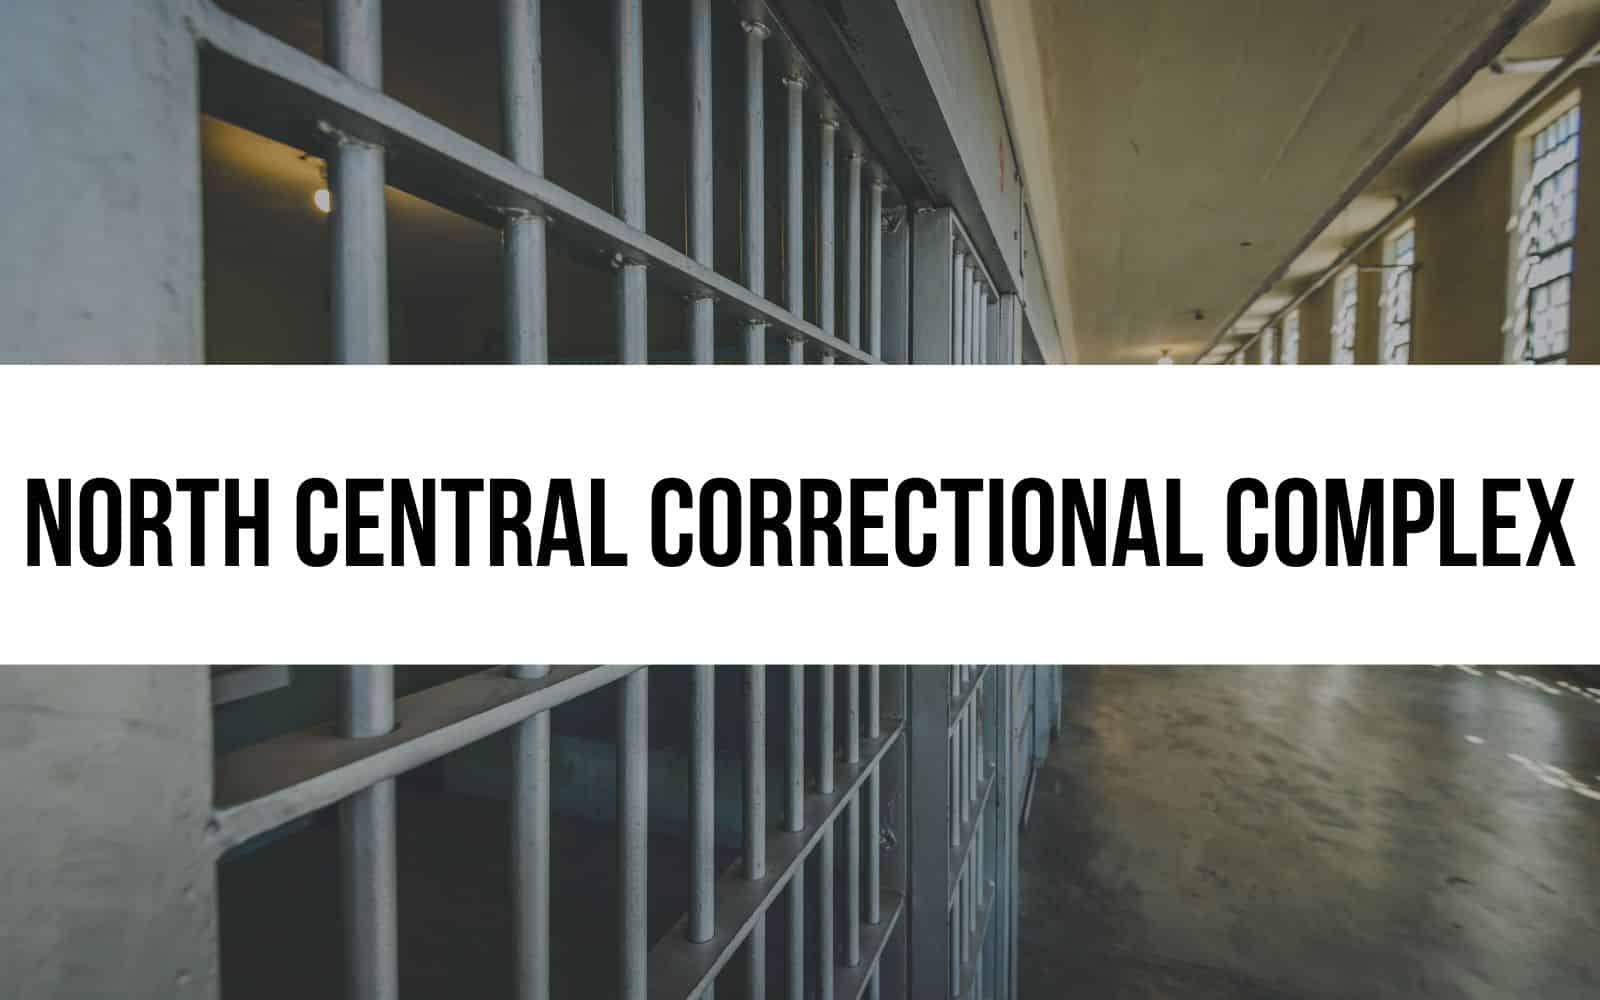 North Central Correctional Complex